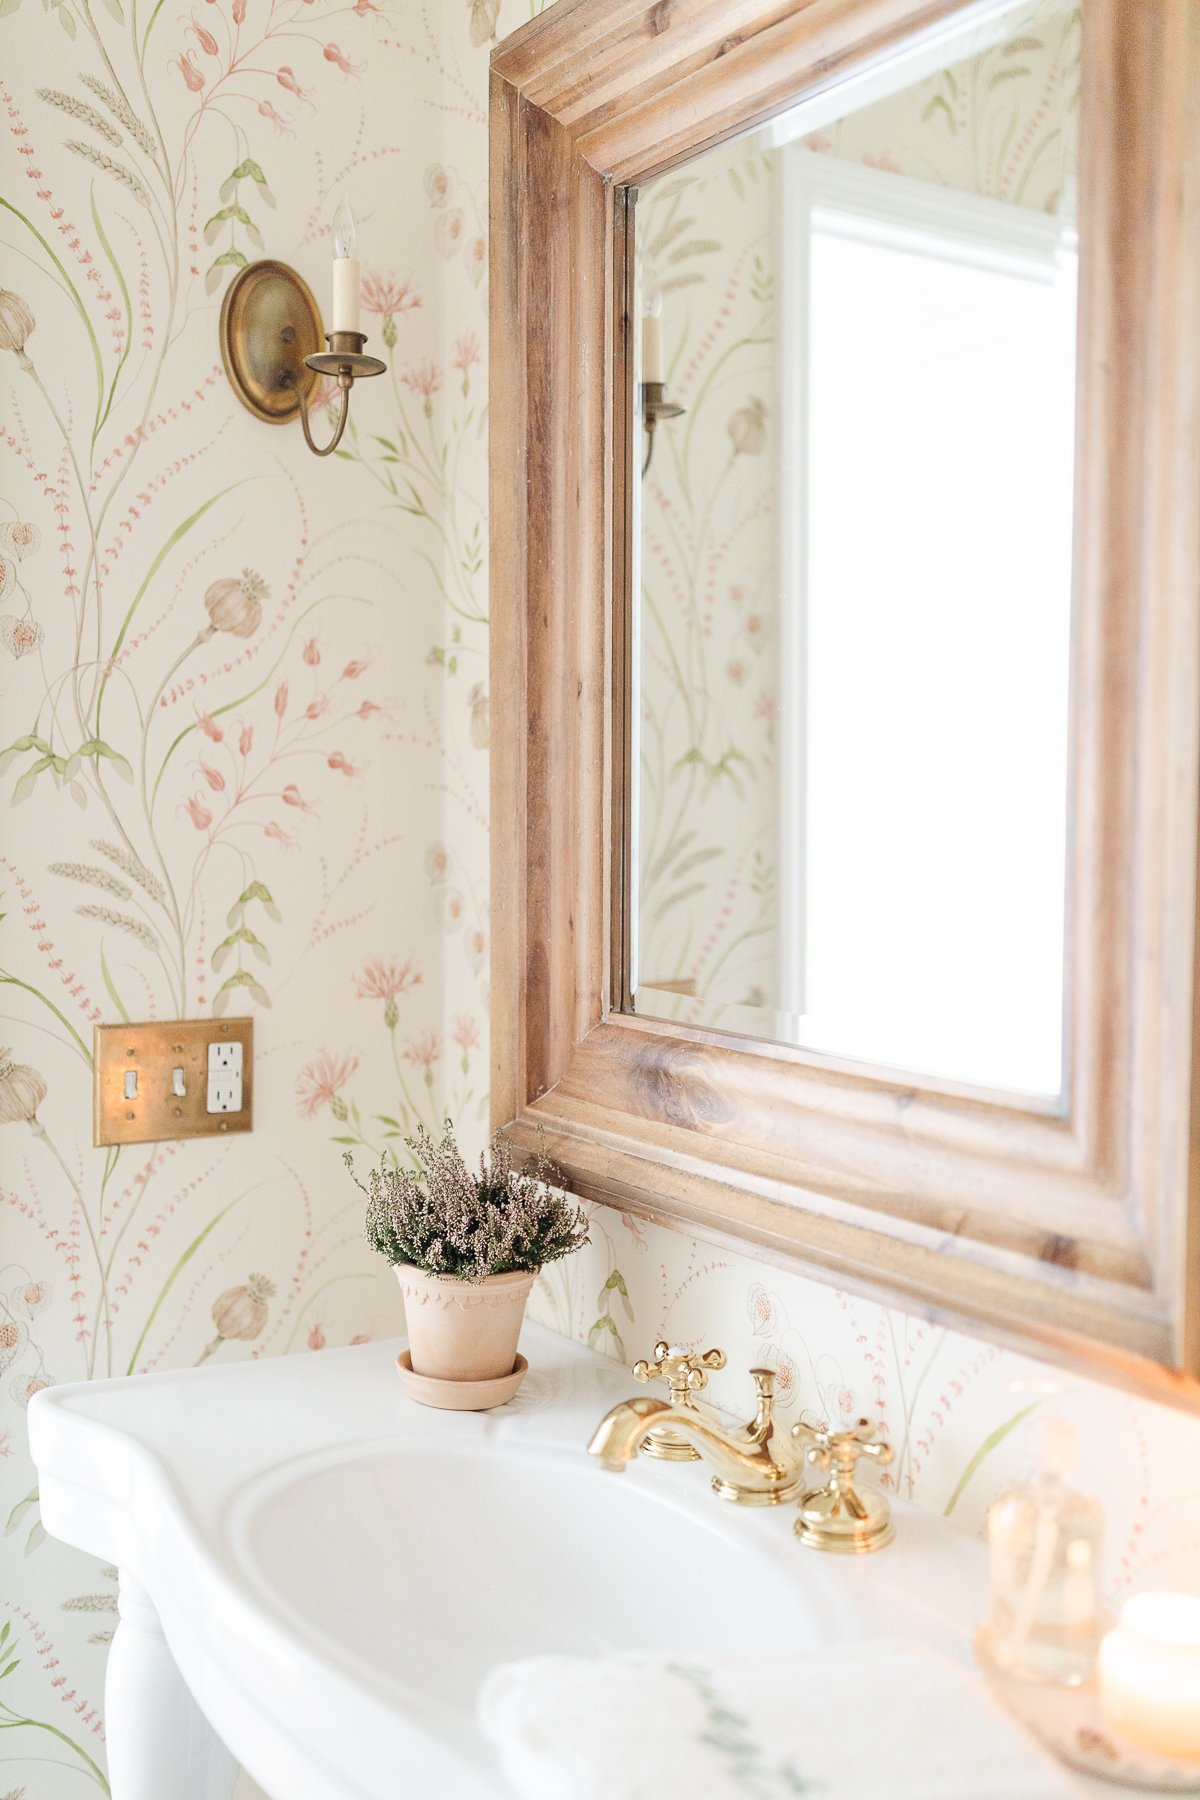 A bathroom with pastel wallpaper and a wood mirror